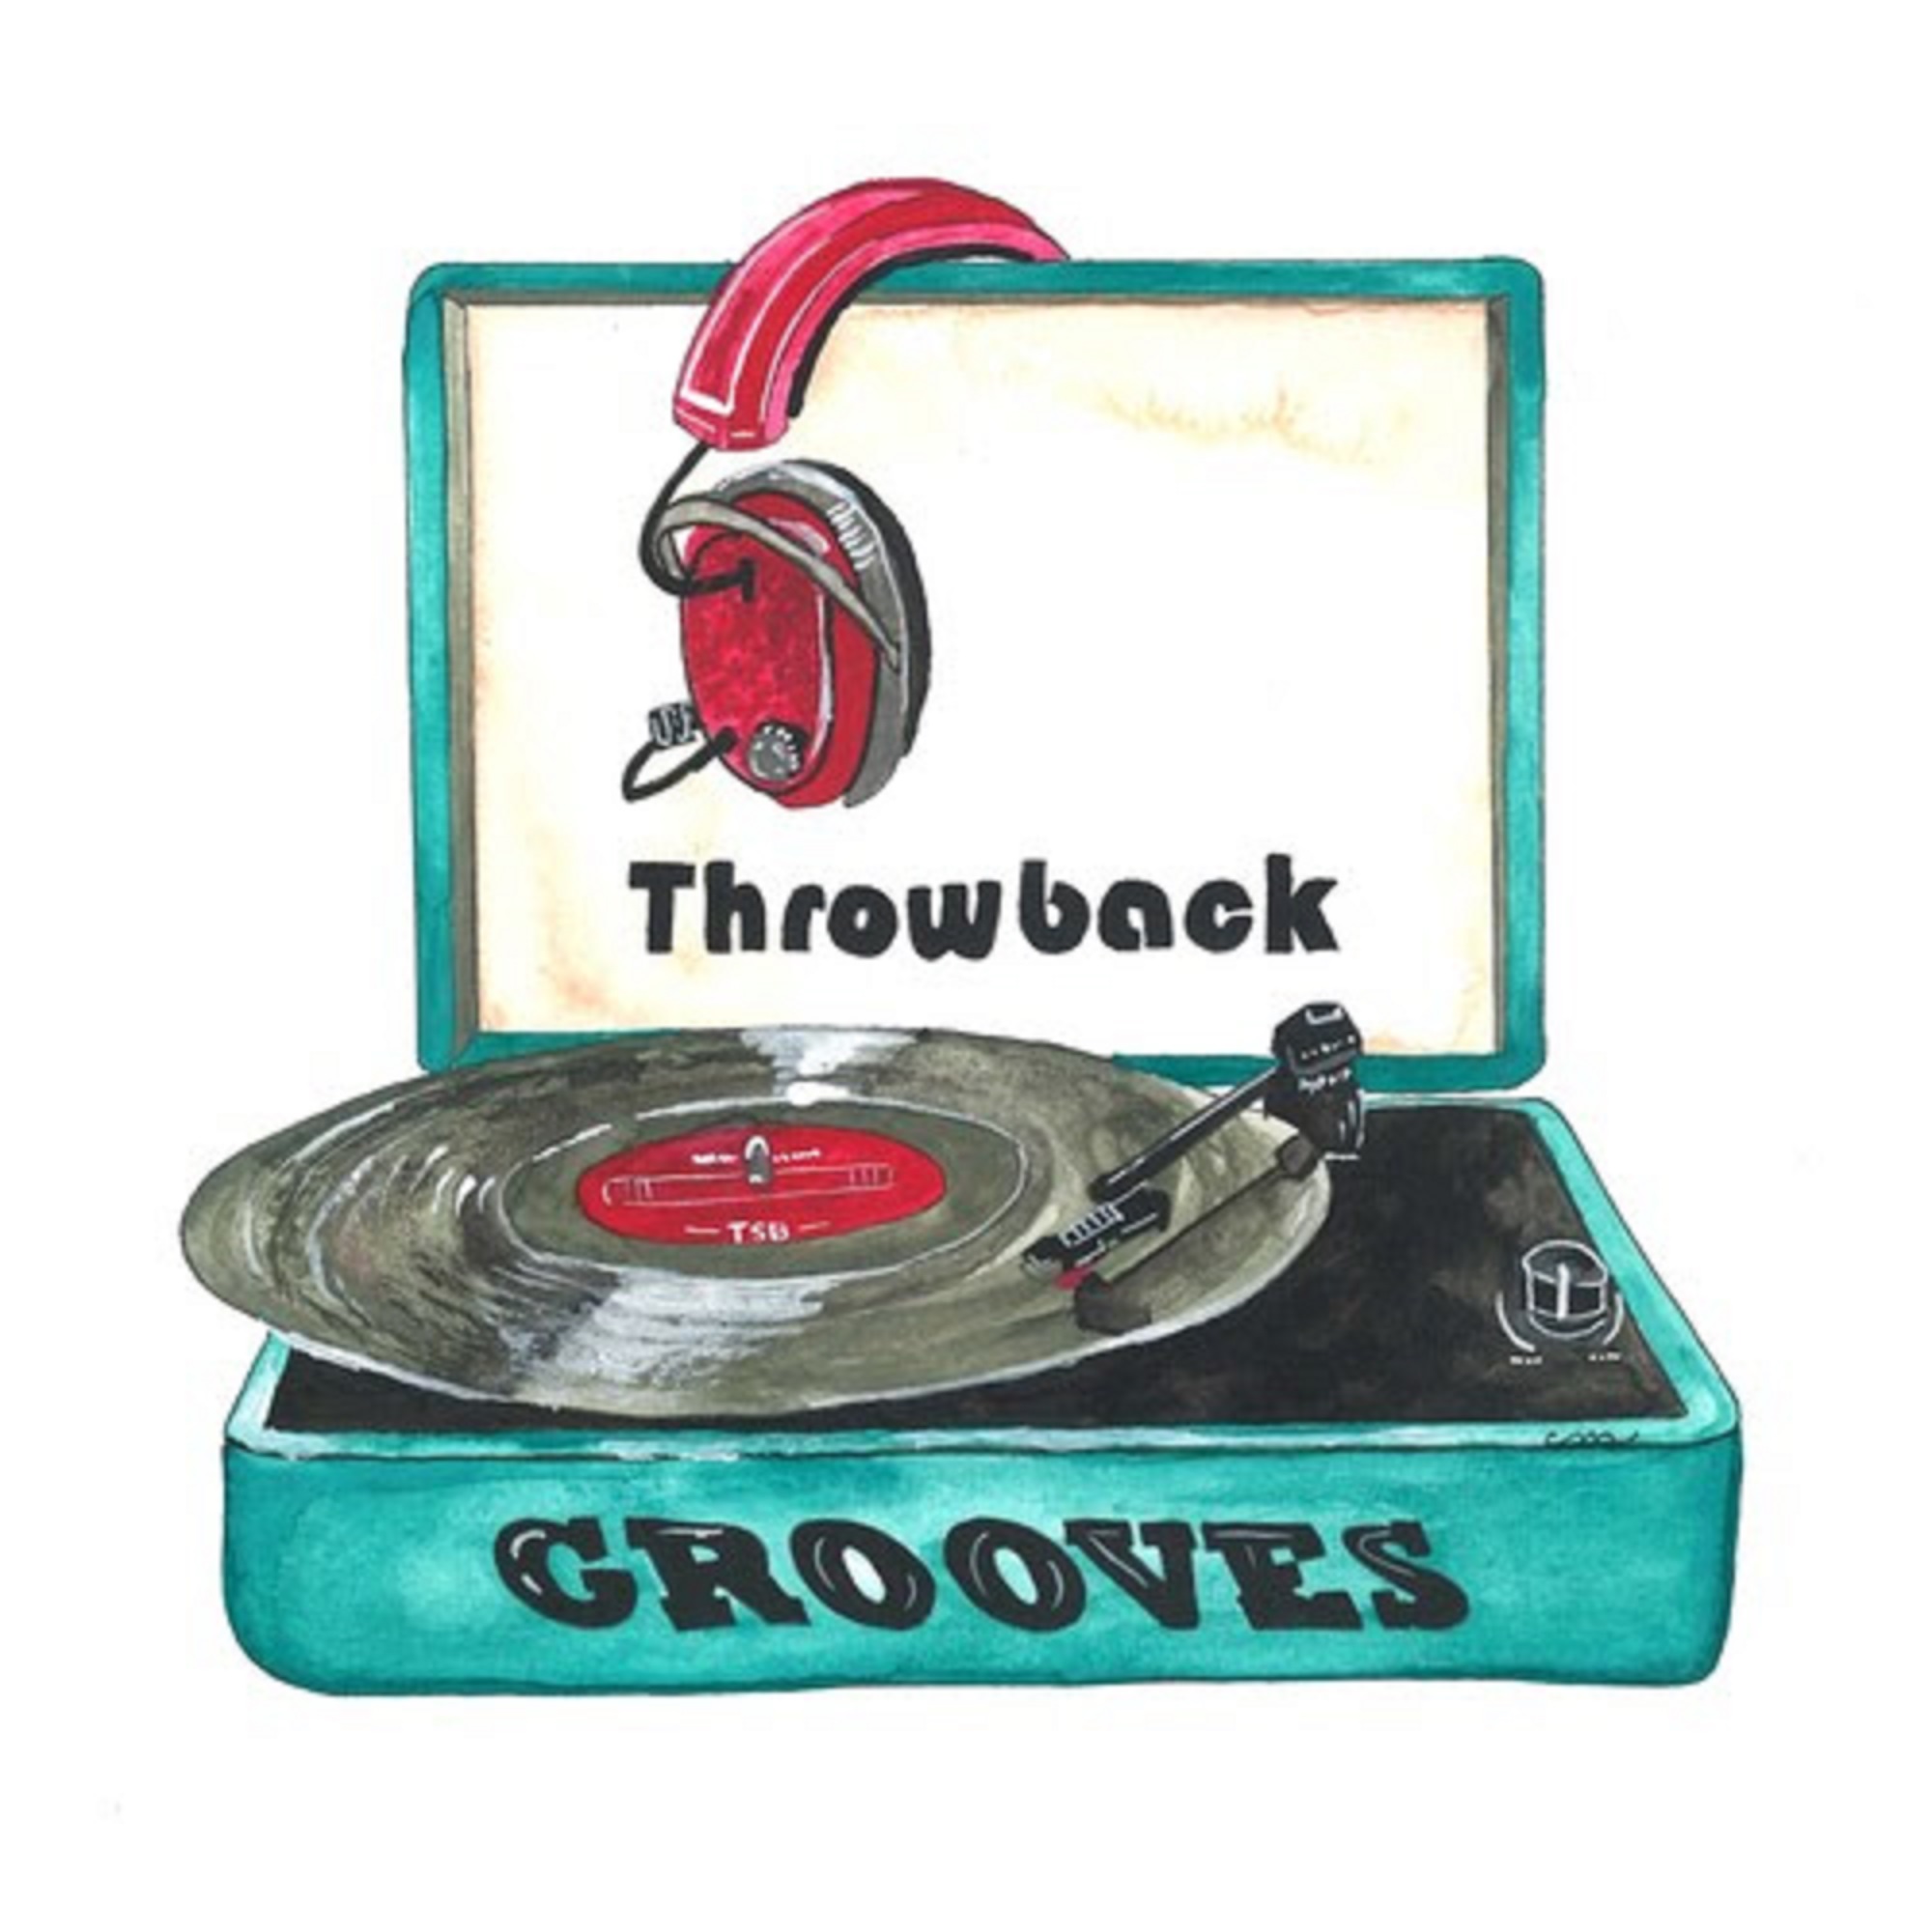 Taylor Scott releases new single, “Throwback Grooves"